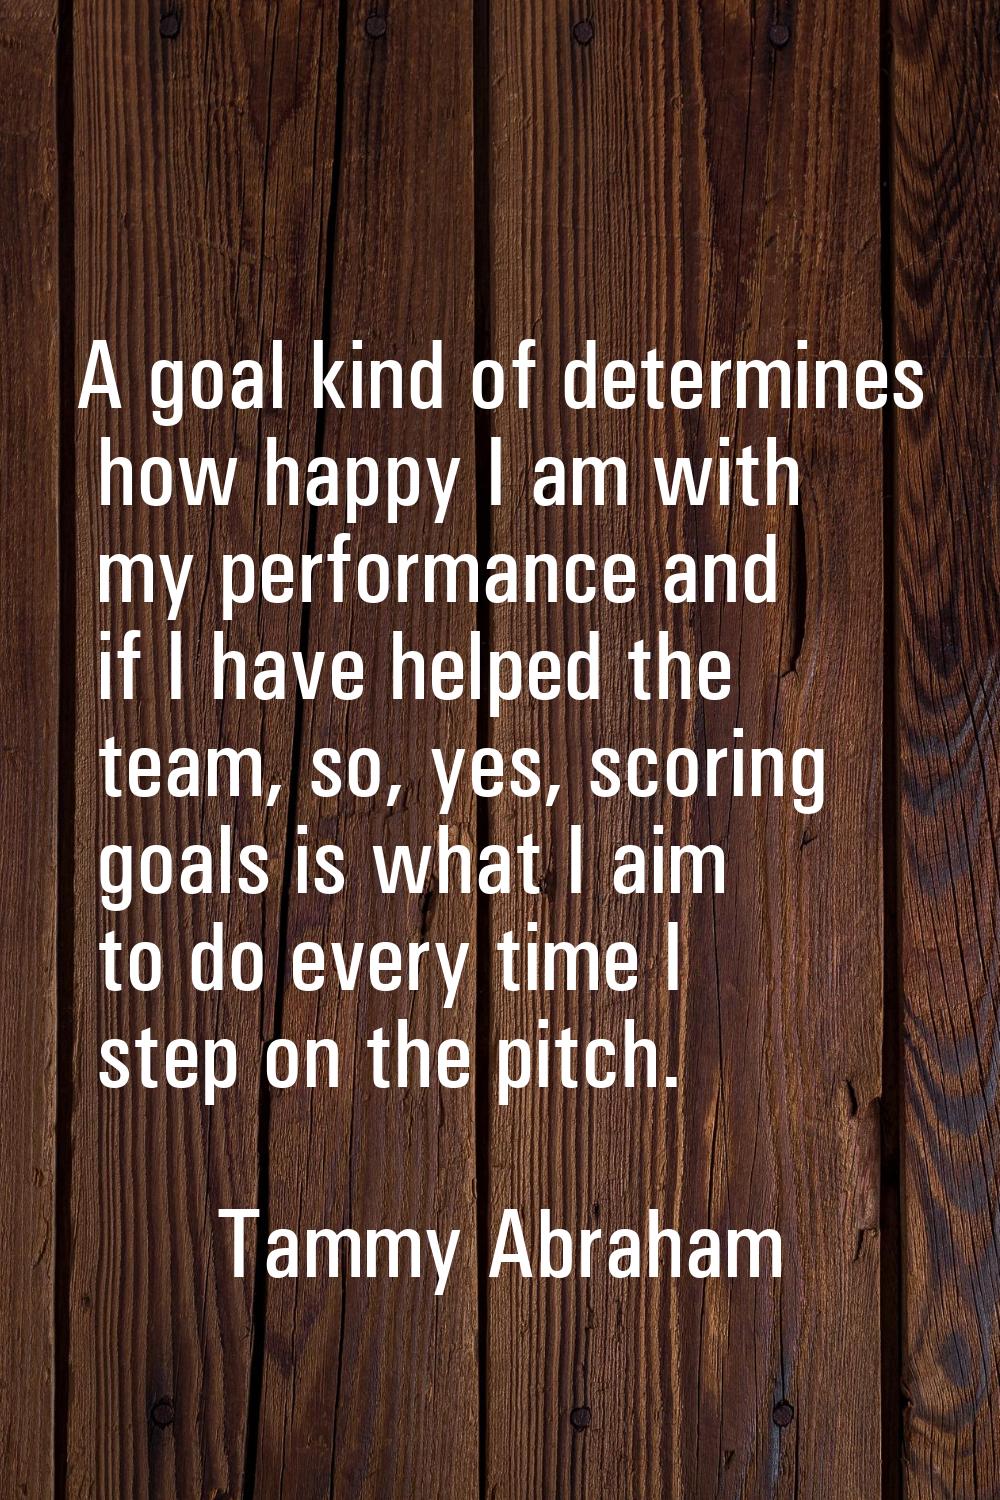 A goal kind of determines how happy I am with my performance and if I have helped the team, so, yes